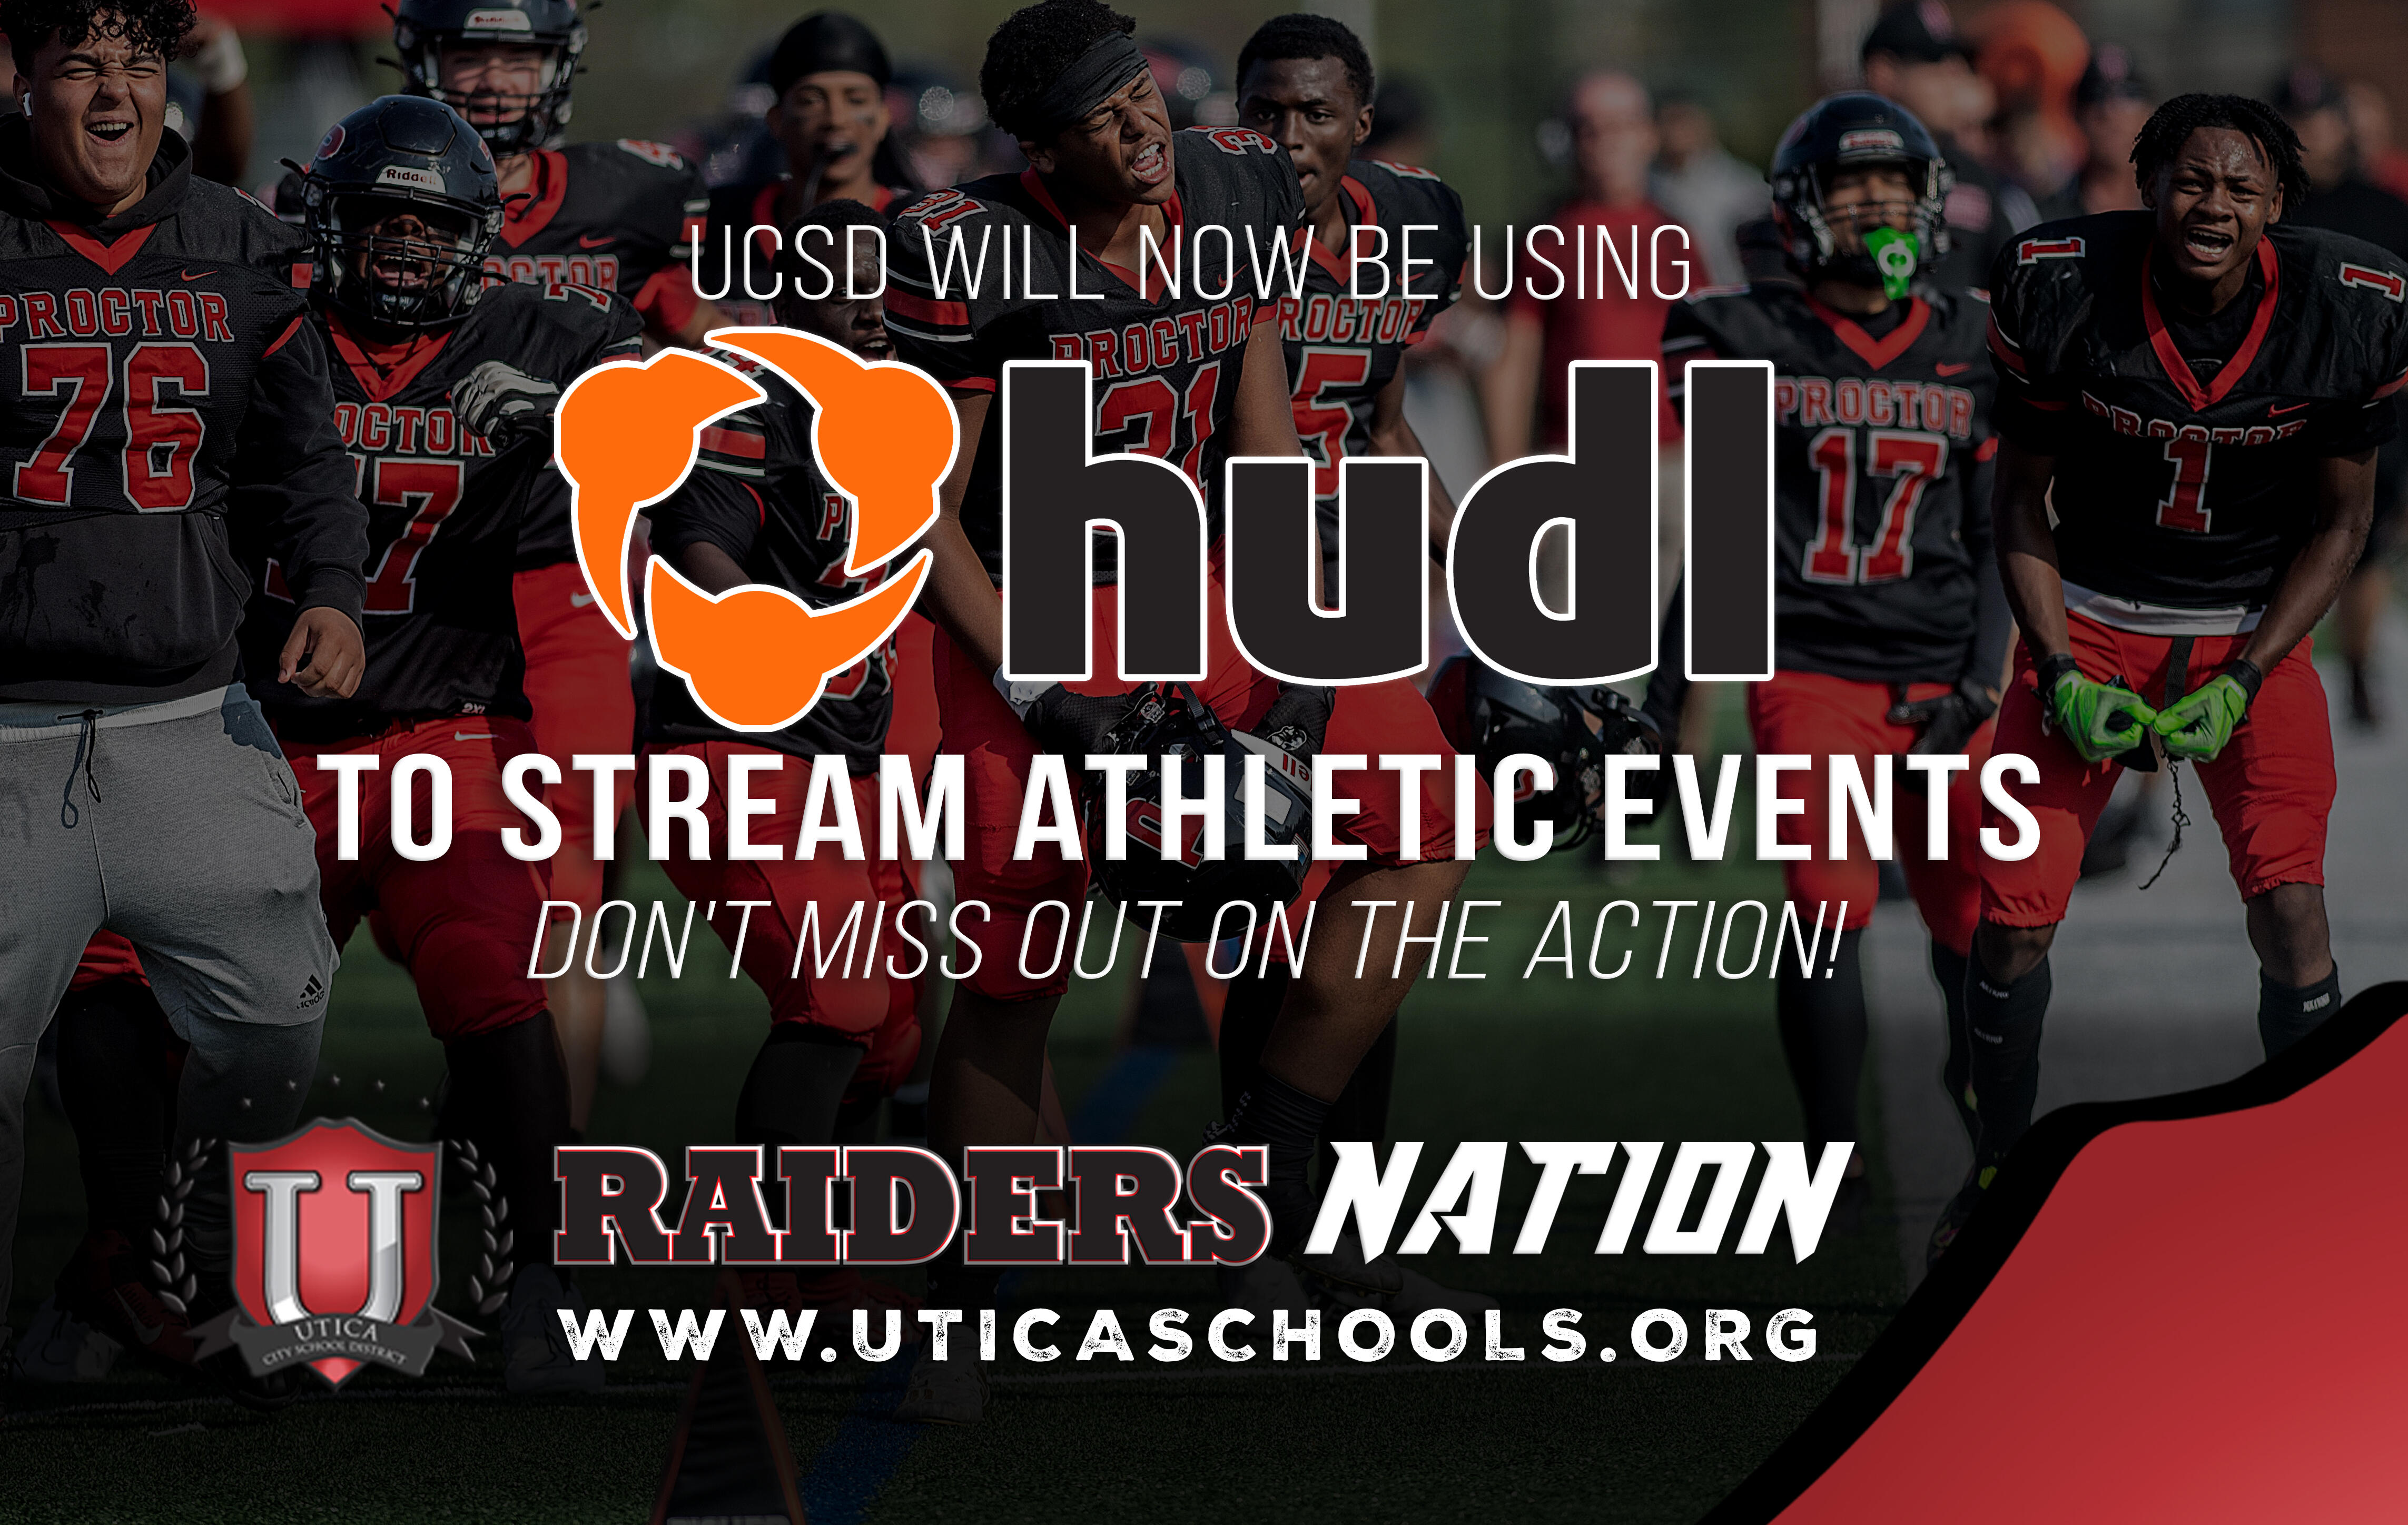 UCSD will now be using HUDL TV to stream athletic events. Don't miss out on the action!